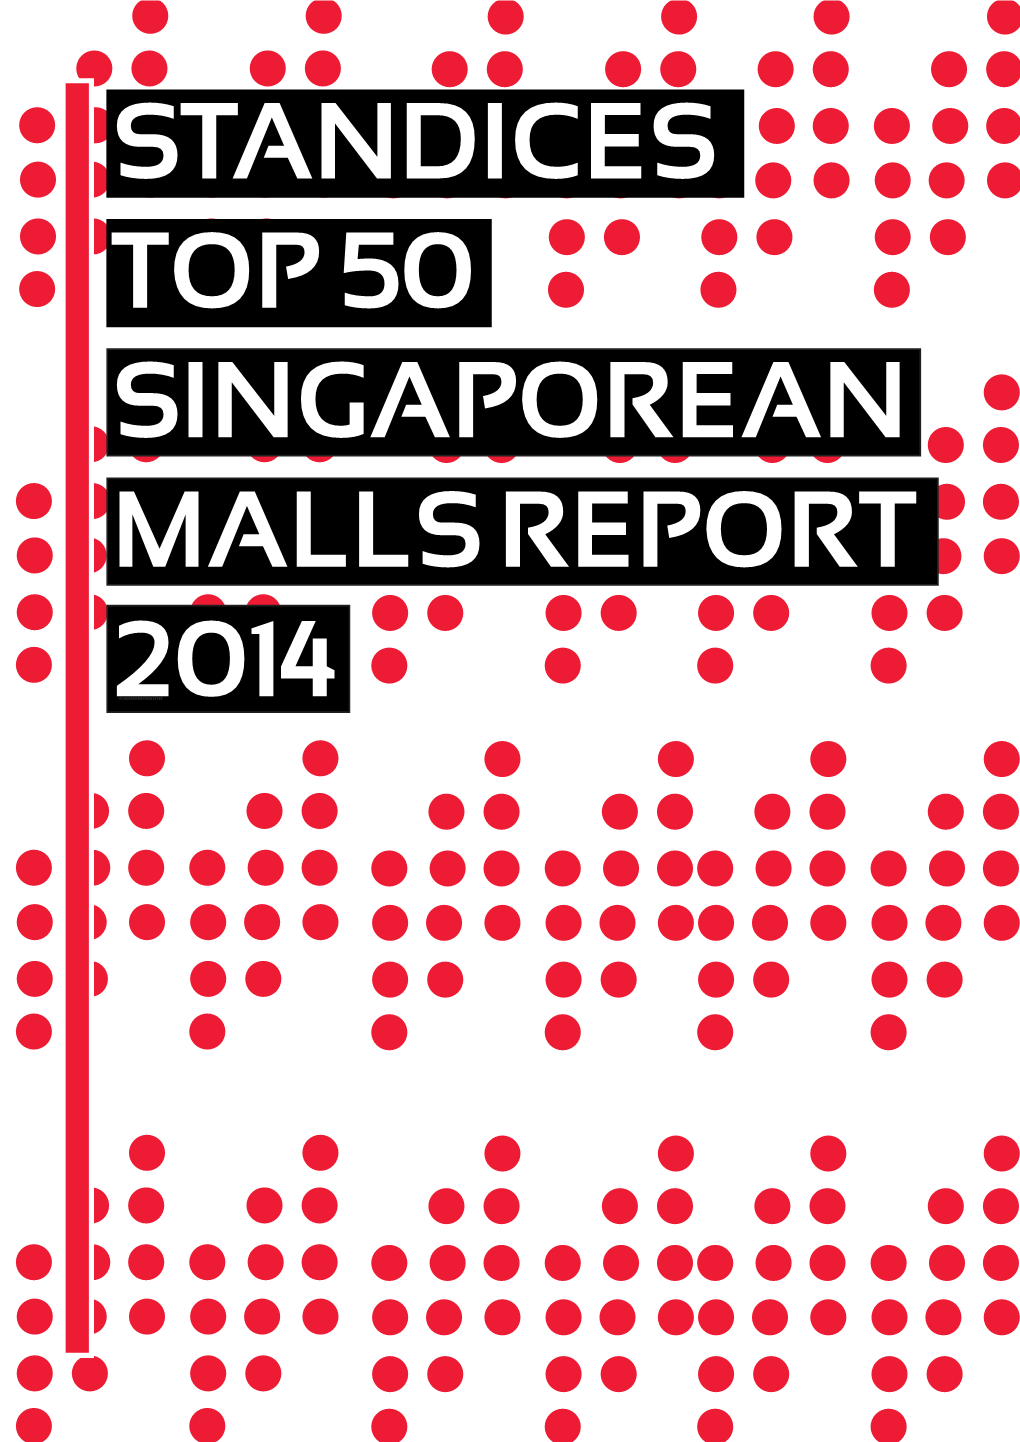 Standices Top 50 Singaporean Malls Report 2014 OVERALL RANKING for TOP 50 MALLS in SINGAPORE Q4 (October 2014 to December 2014)